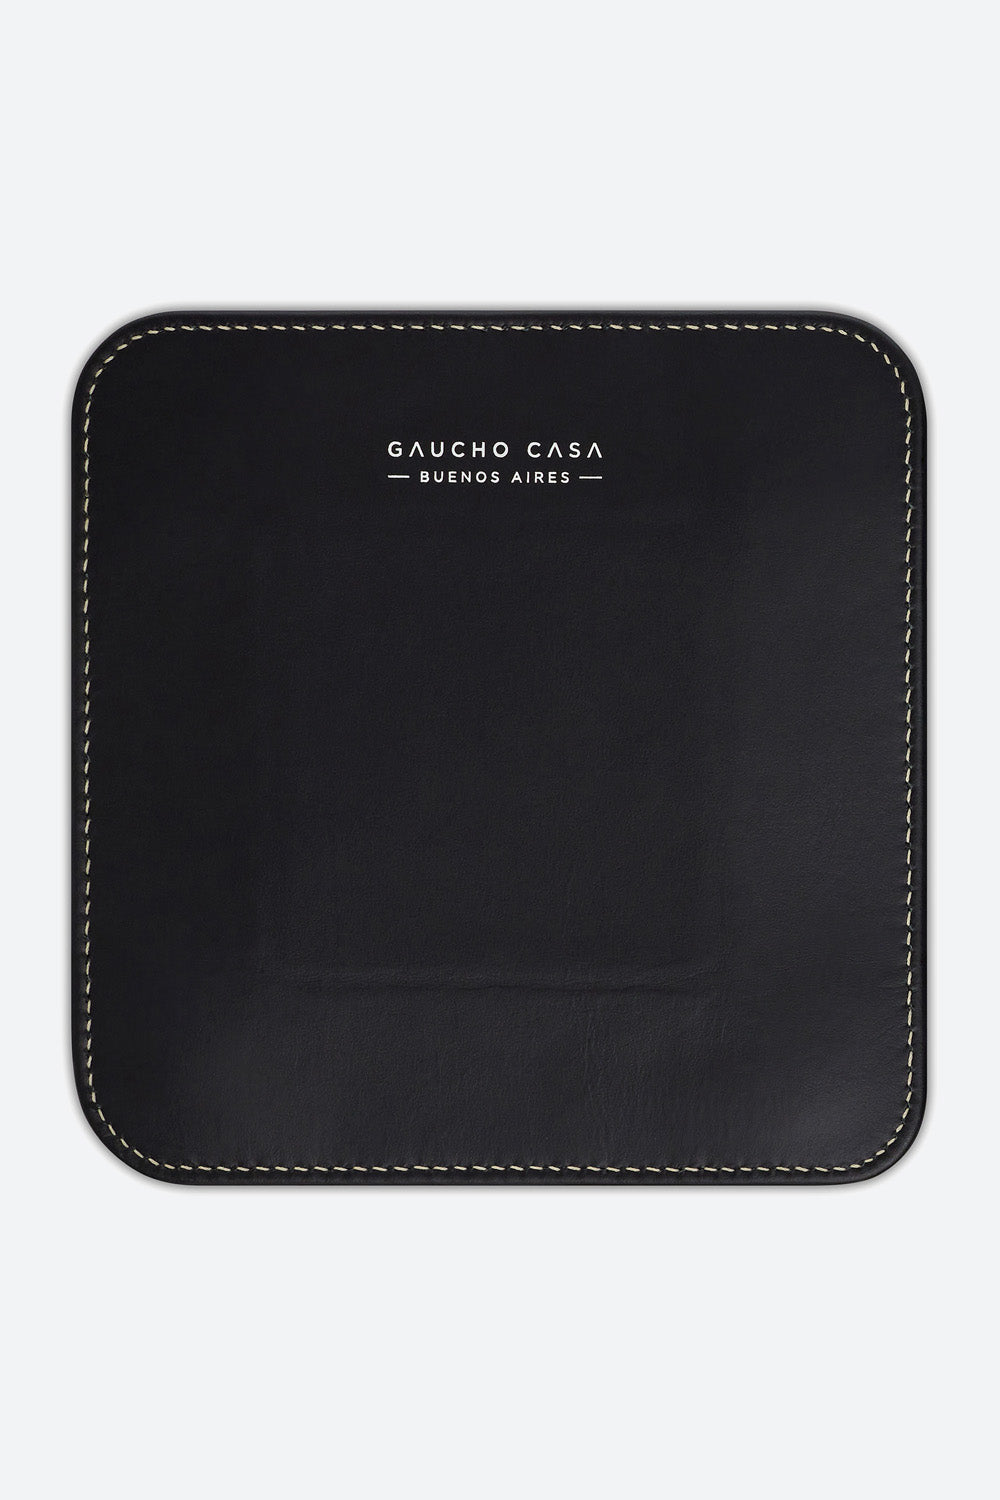 Small Square Leather Valet Tray in Black